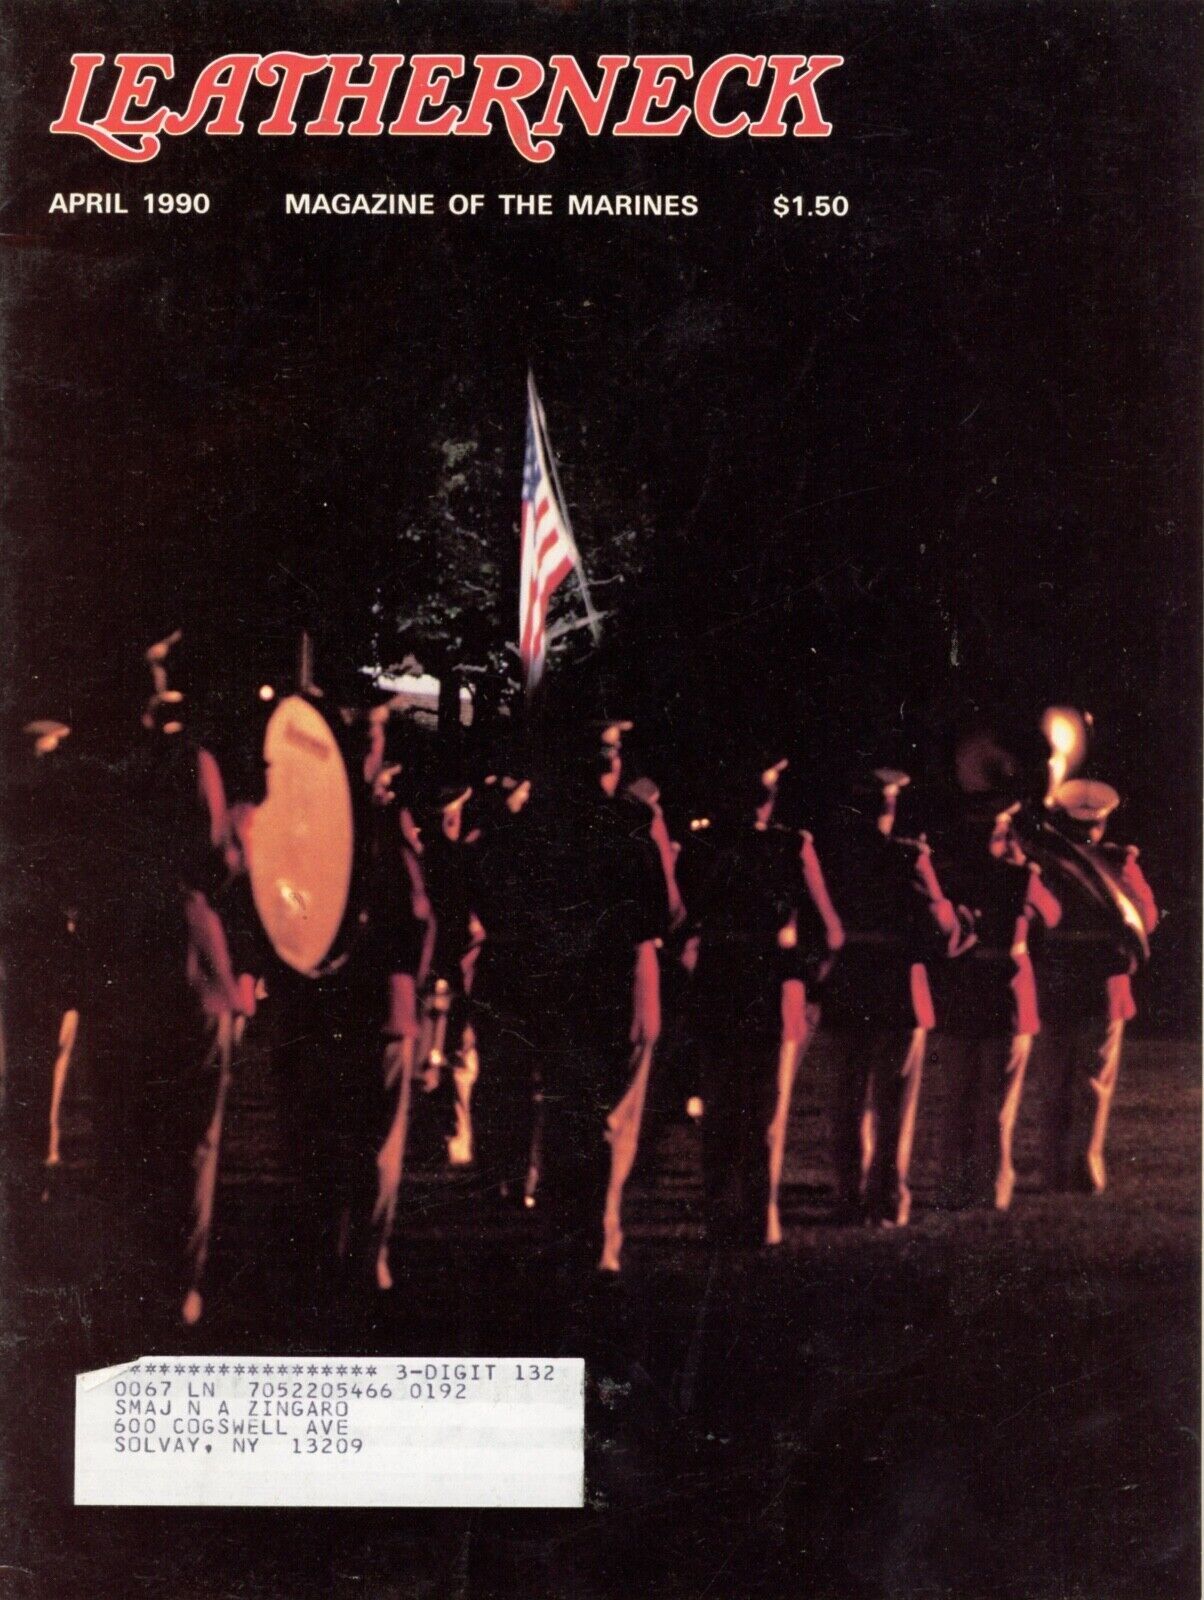 Leatherneck: Magazine of the Marines (Vol. 73) #4 FN; Marine Corps Assoc | April